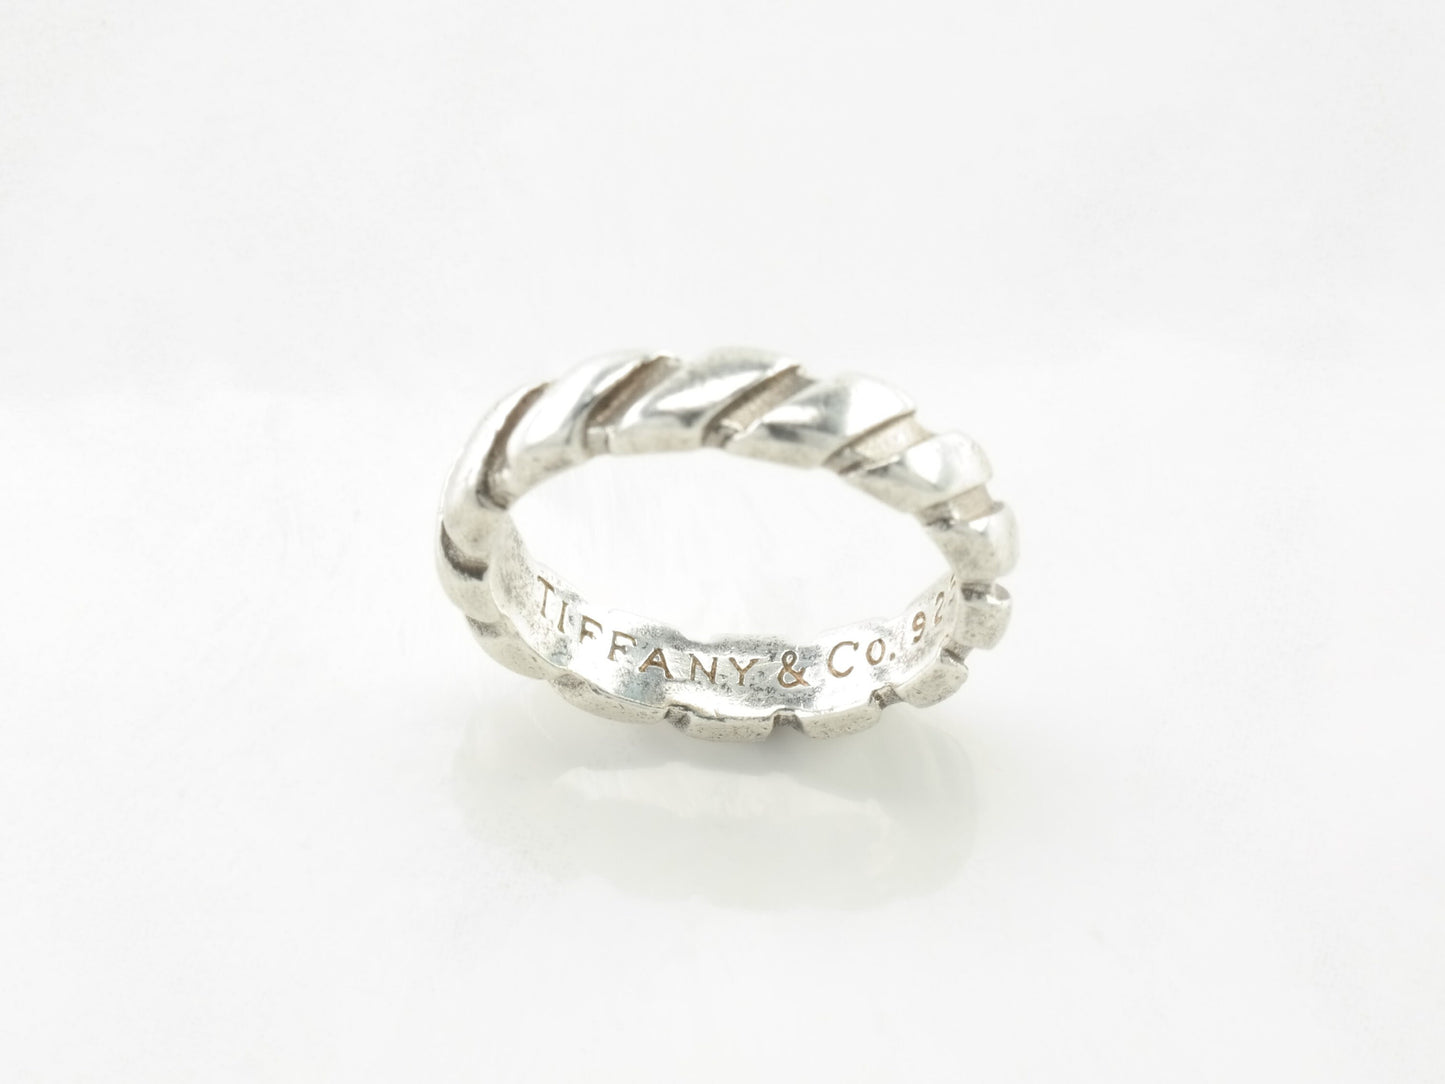 Vintage Tiffany & CO Silver Ring Sterling Size 5